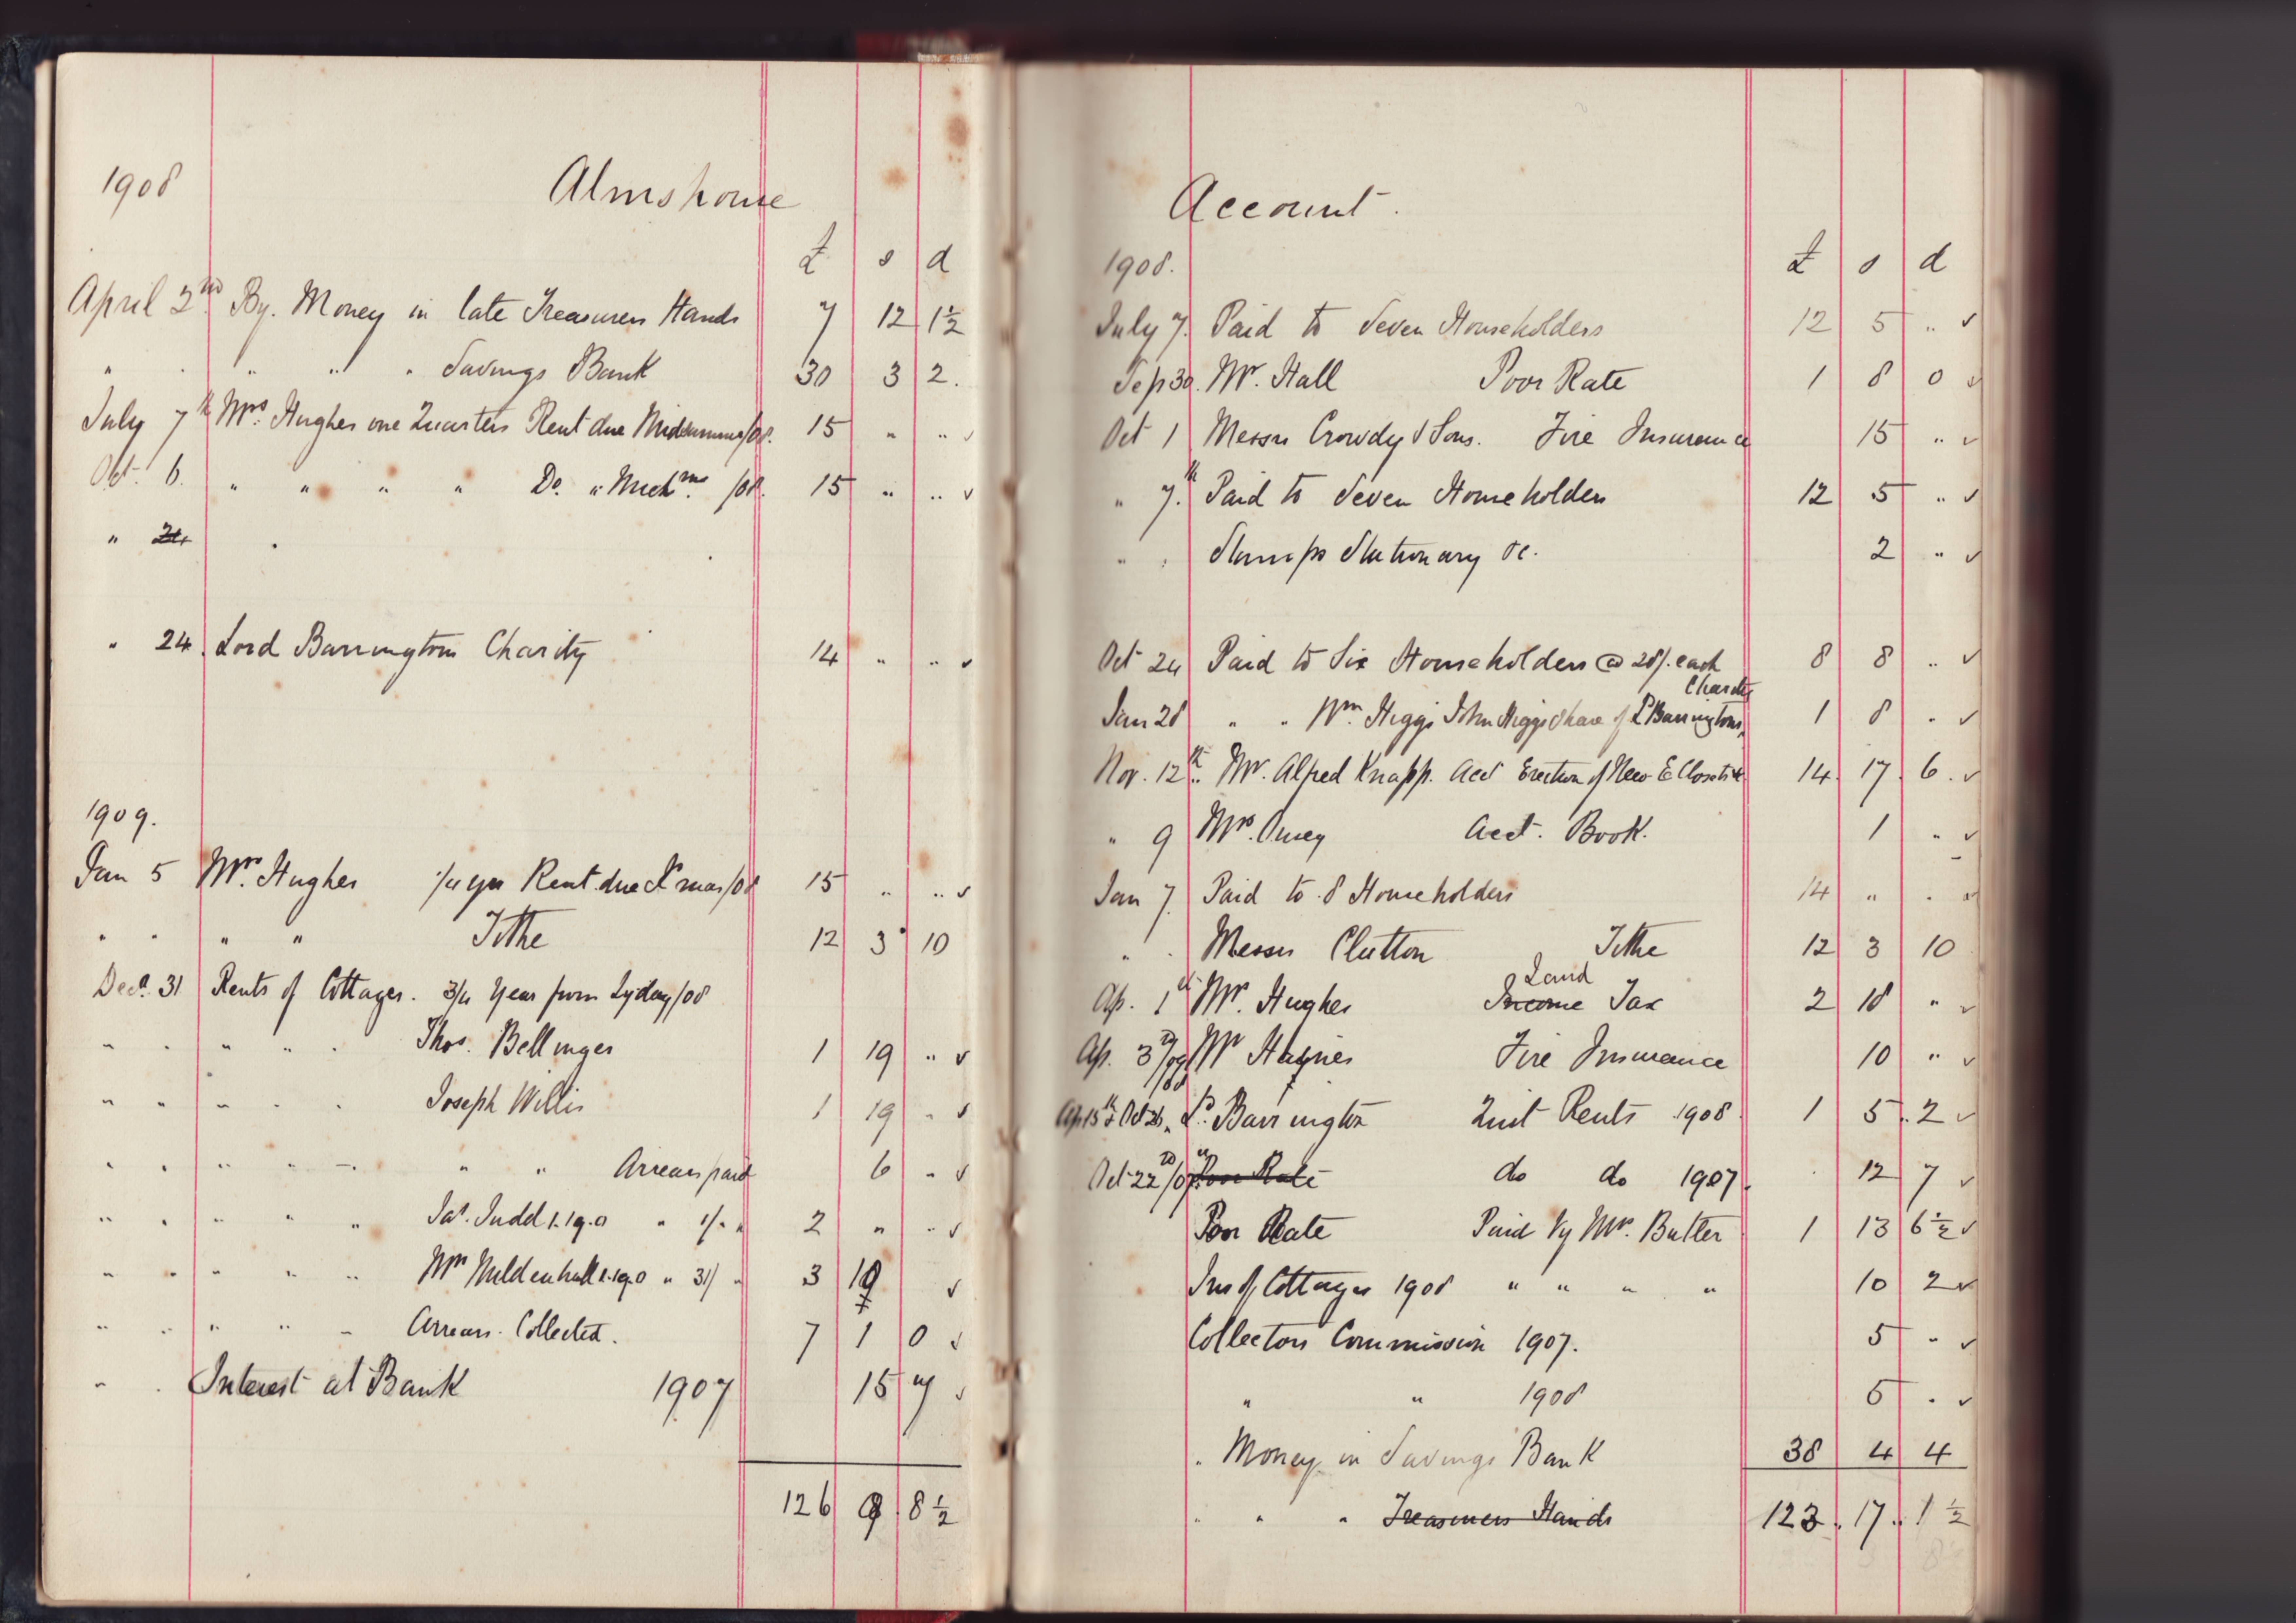 Two pages from the Accounts book